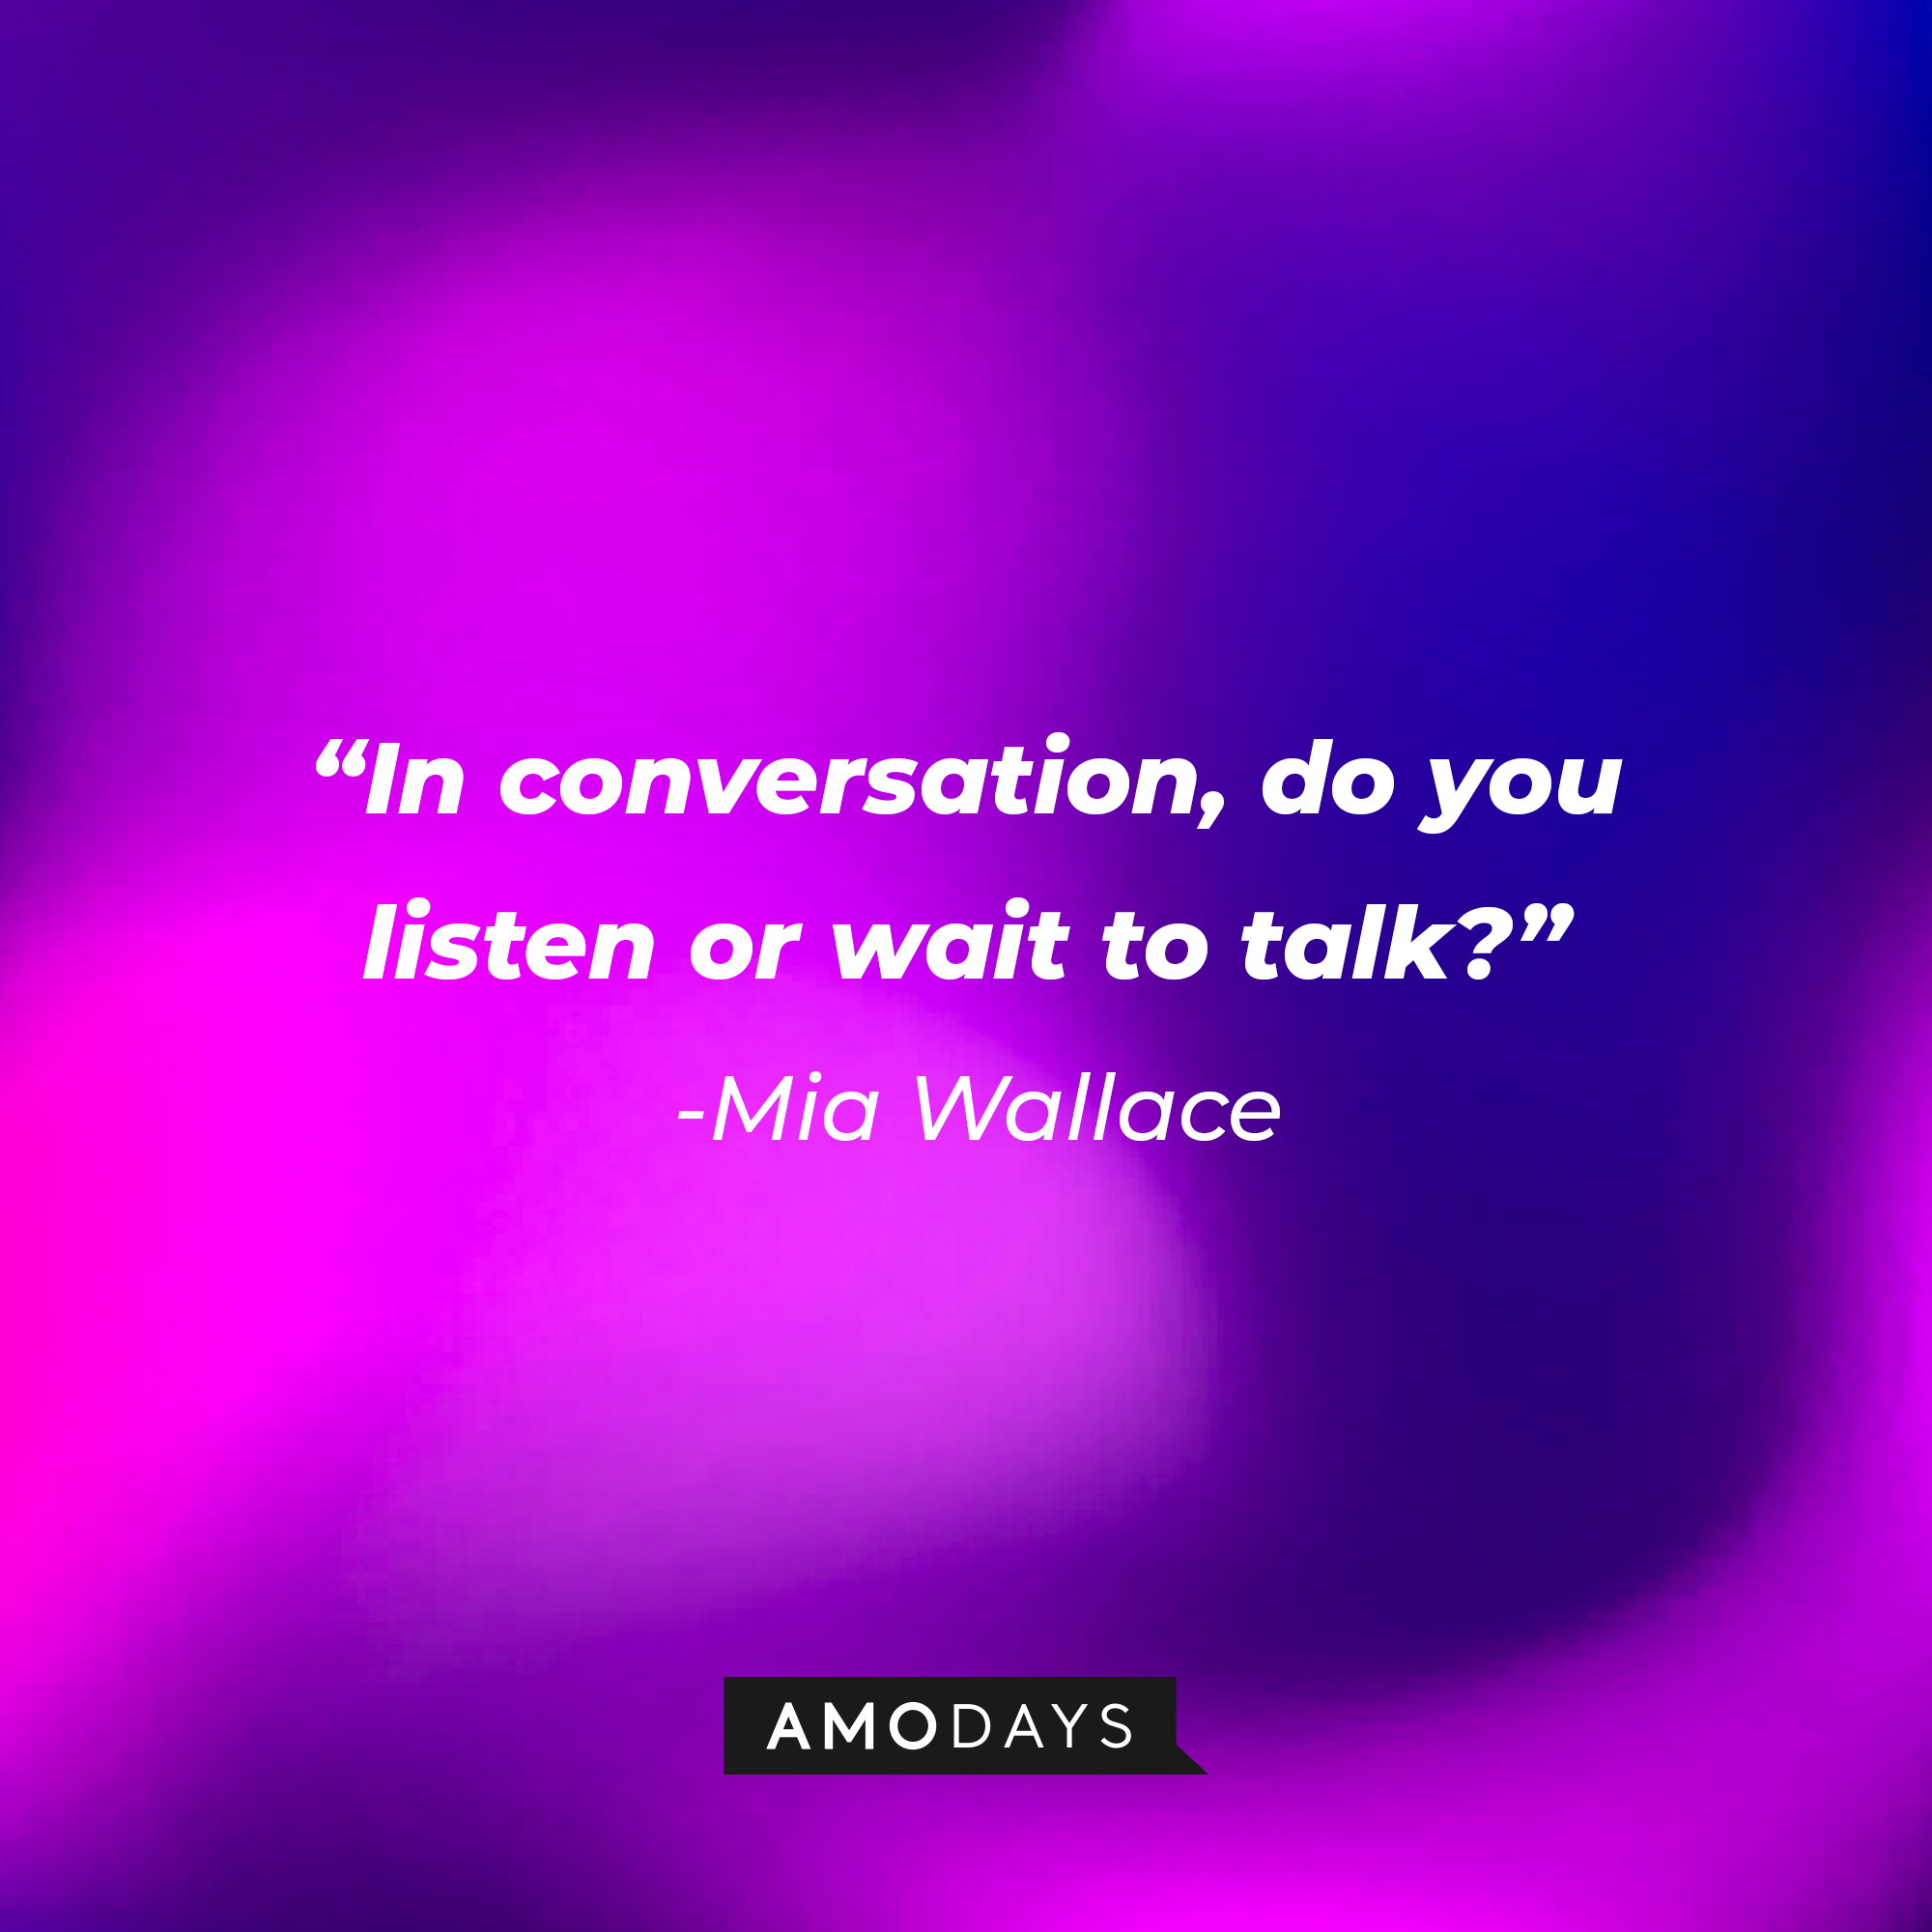 Mia Wallace’s quote: “In conversation, do you listen or wait to talk?” | Source: AmoDays